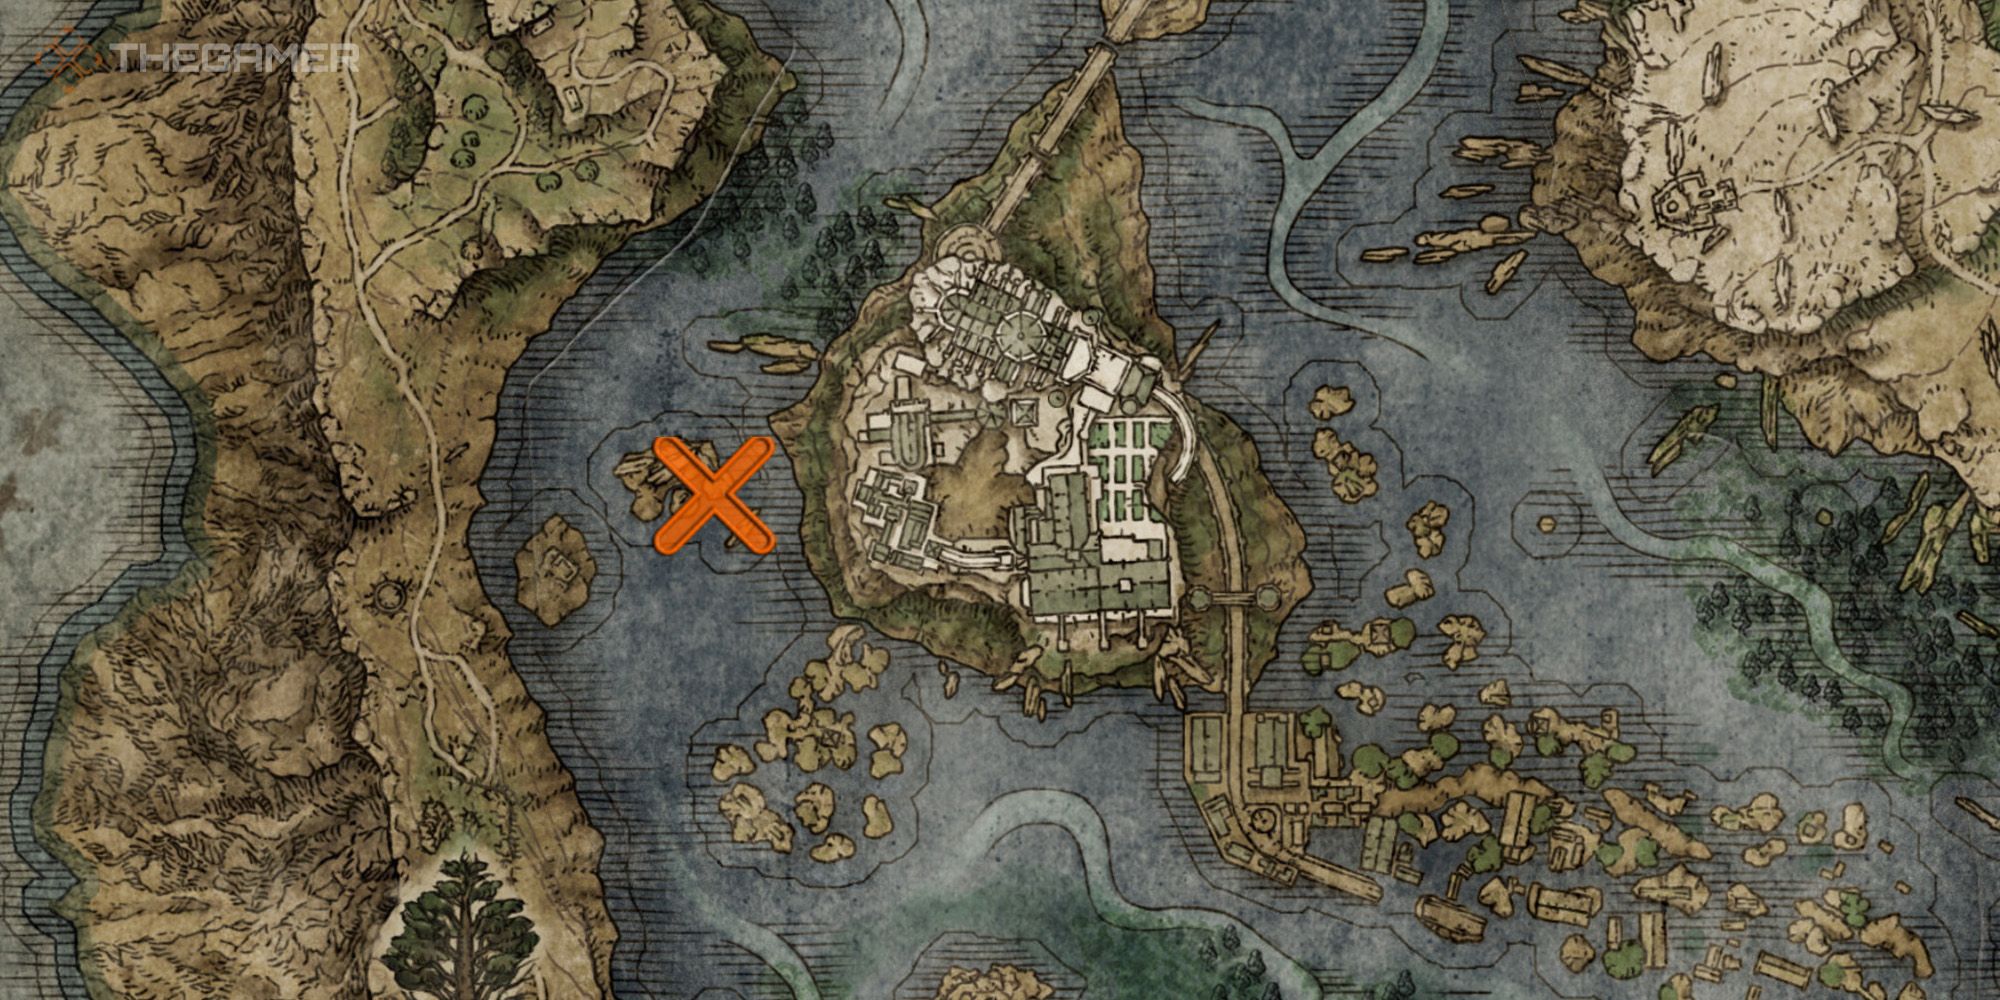 Map showing the location of Glintstone Dragon Smarag within Liurnia in Elden Ring